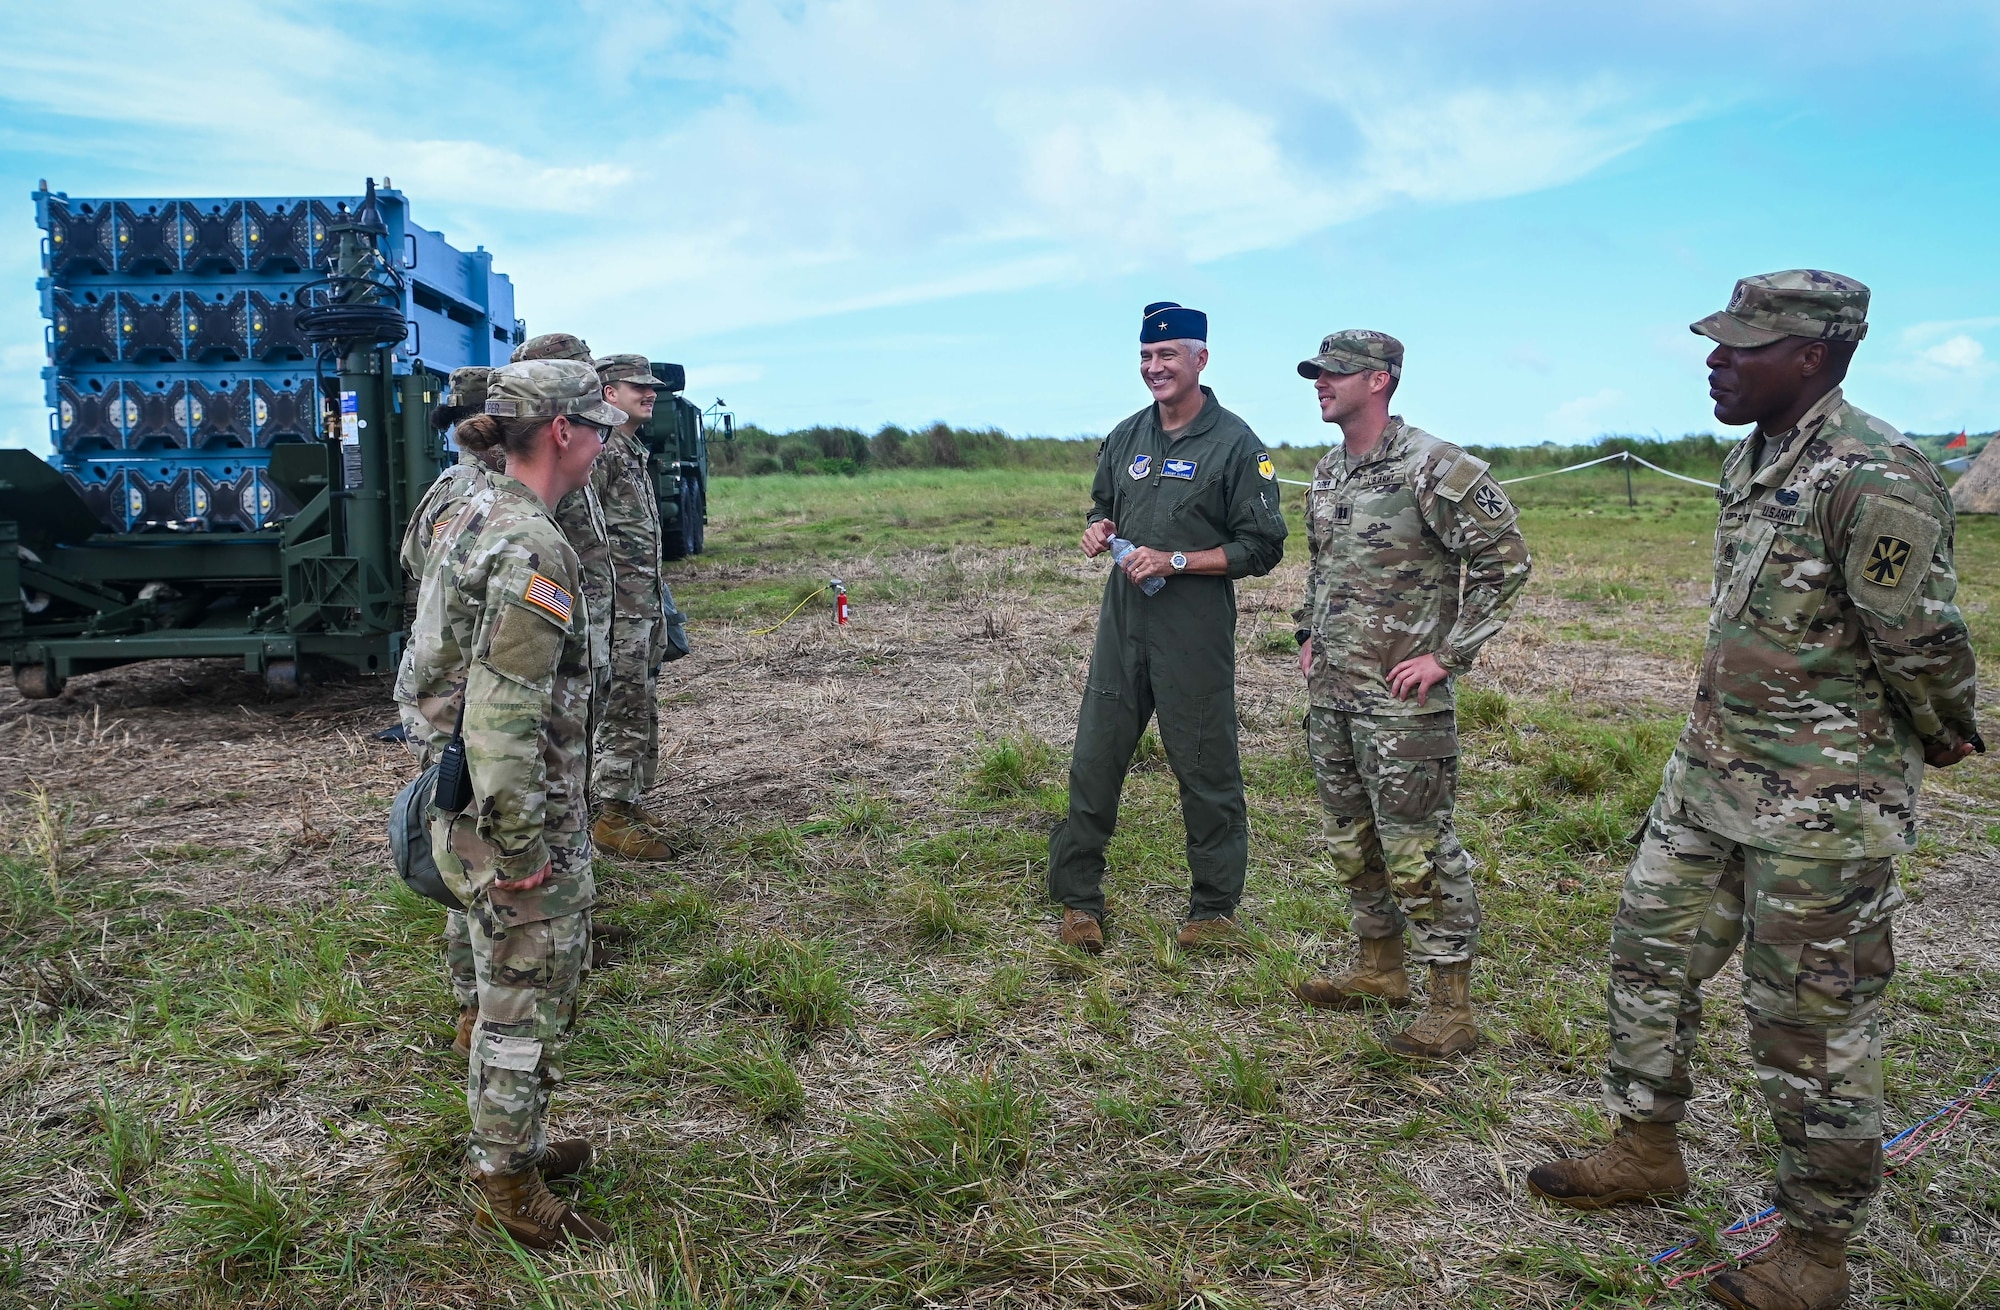 U.S. Air Force Brig. Gen. Jeremy Sloane, commander of the 36th Wing, meets with U.S. Army soldiers assigned to the 38th Air Defense Artillery Brigade, during Operation Iron Island at Site Armadillo, Nov. 17, 2021.